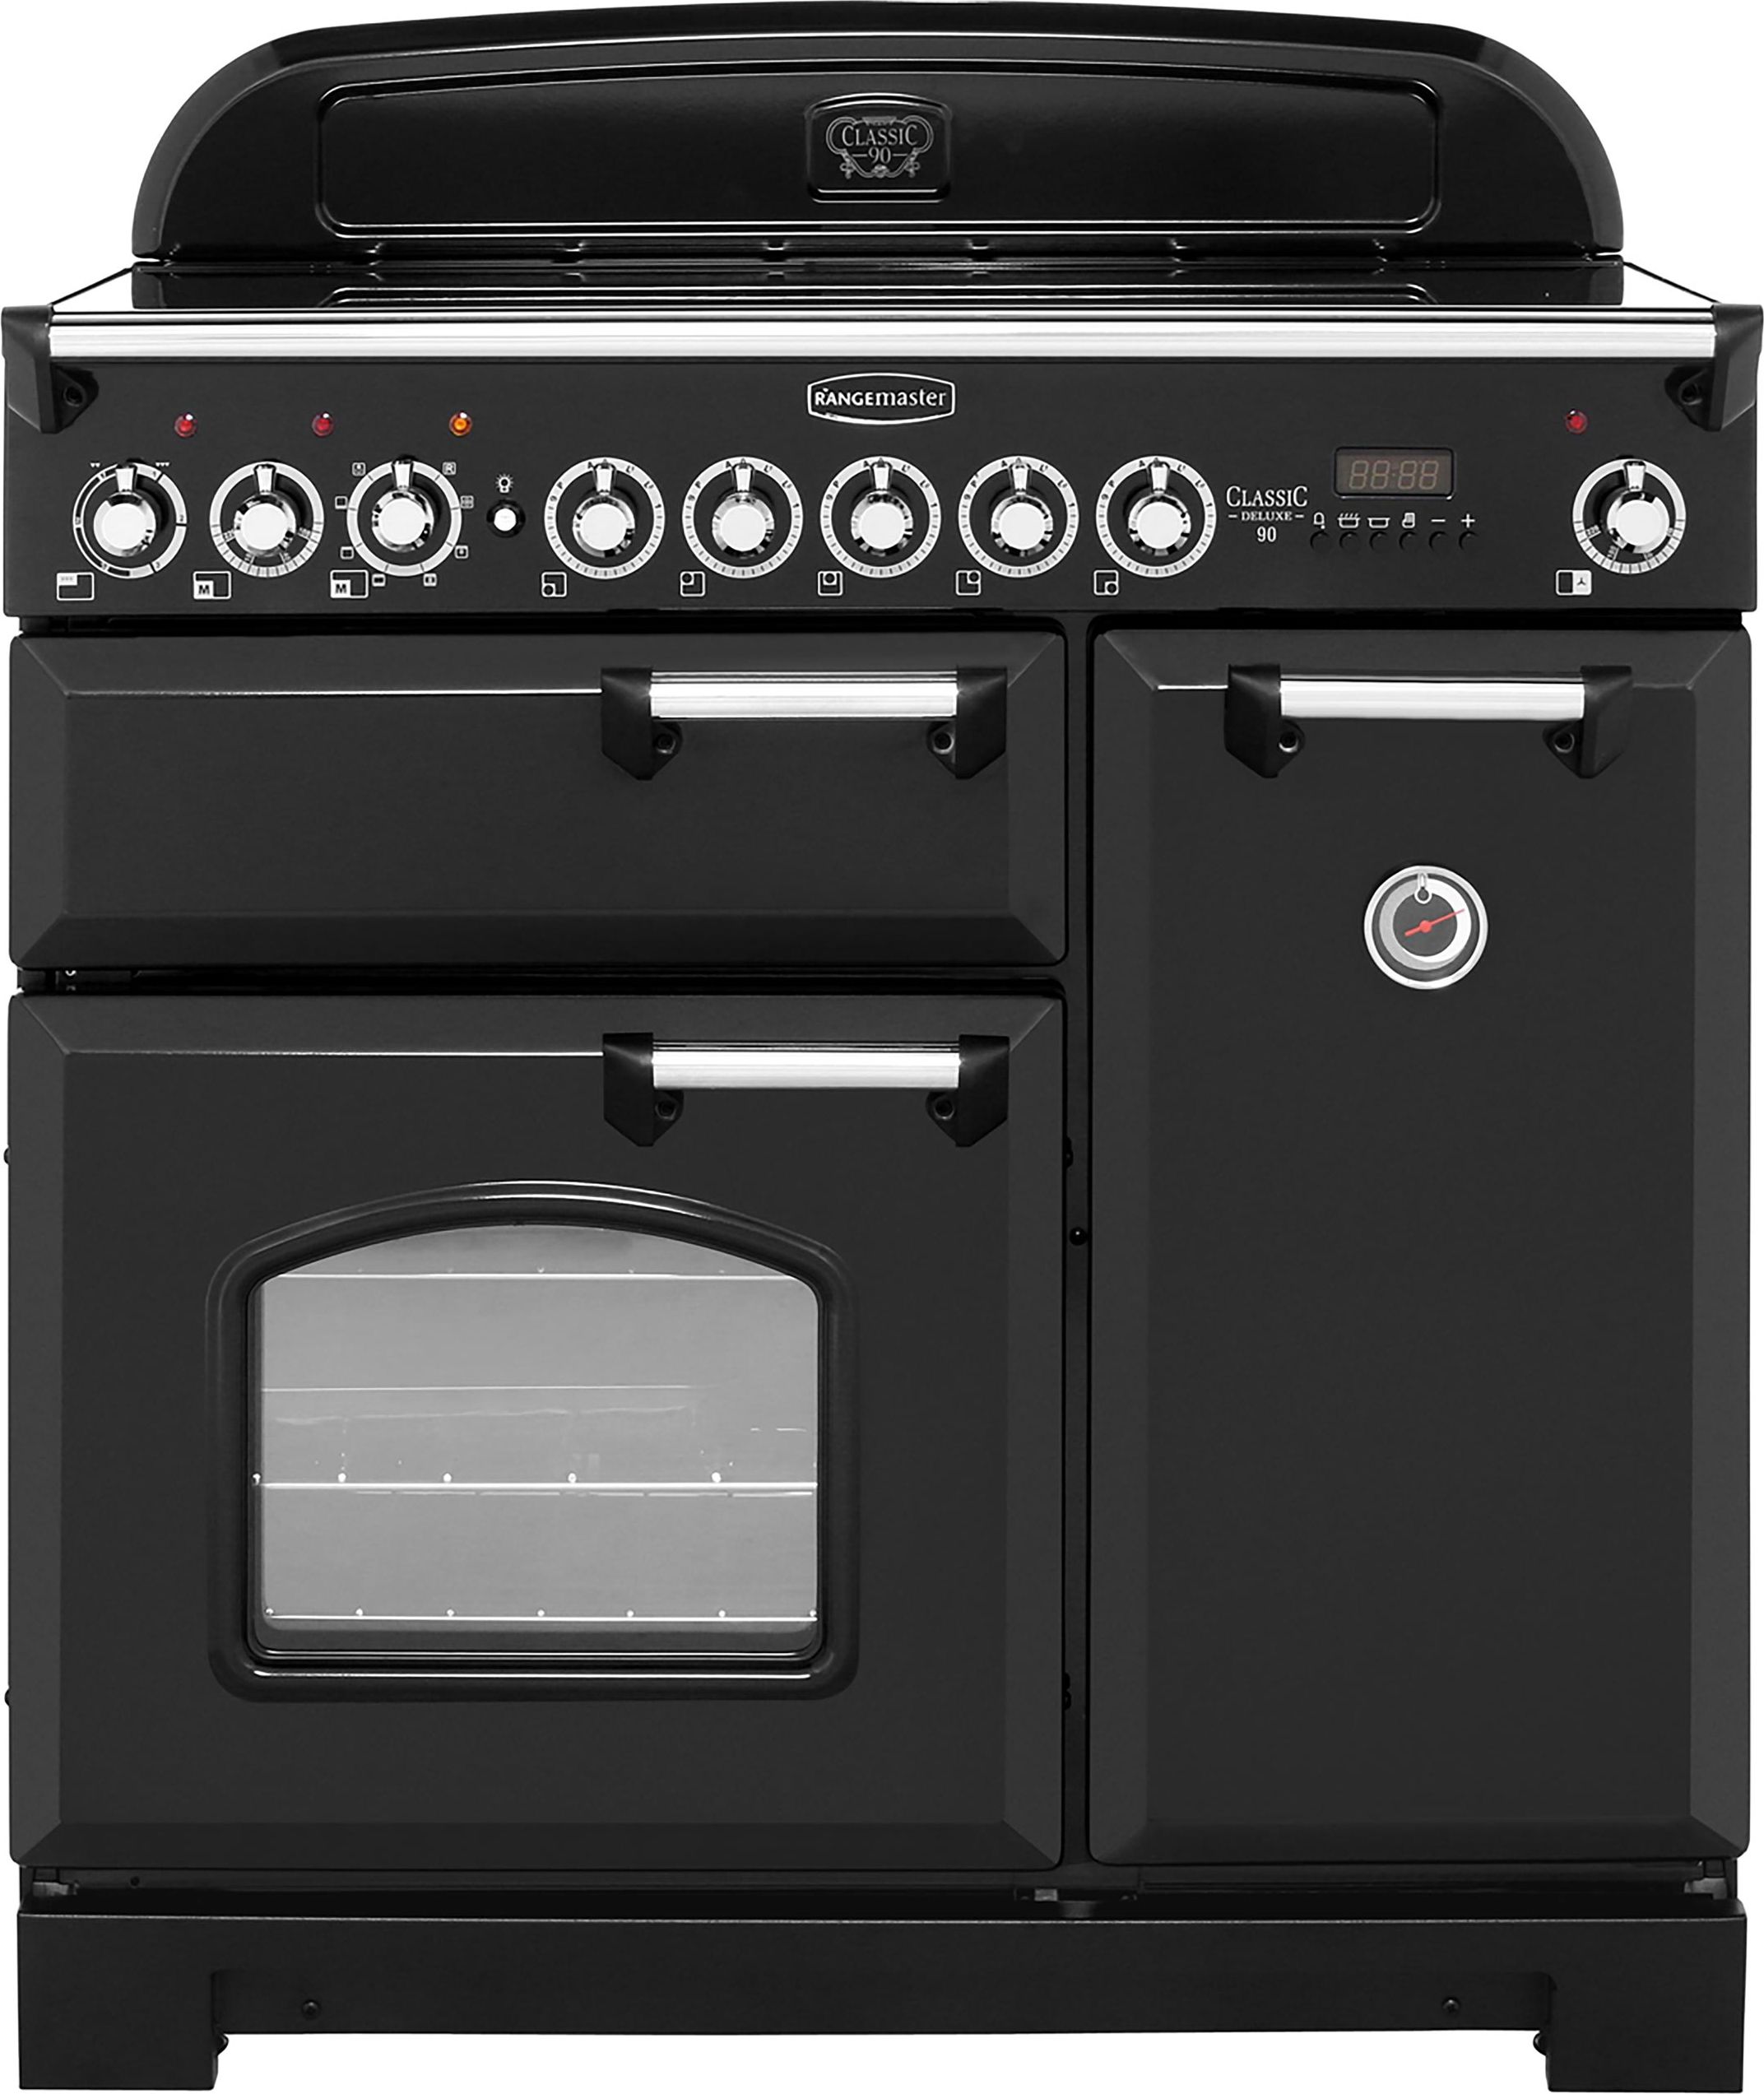 Rangemaster Classic Deluxe CDL90EIBL/C 90cm Electric Range Cooker with Induction Hob - Black / Chrome - A/A Rated, Black